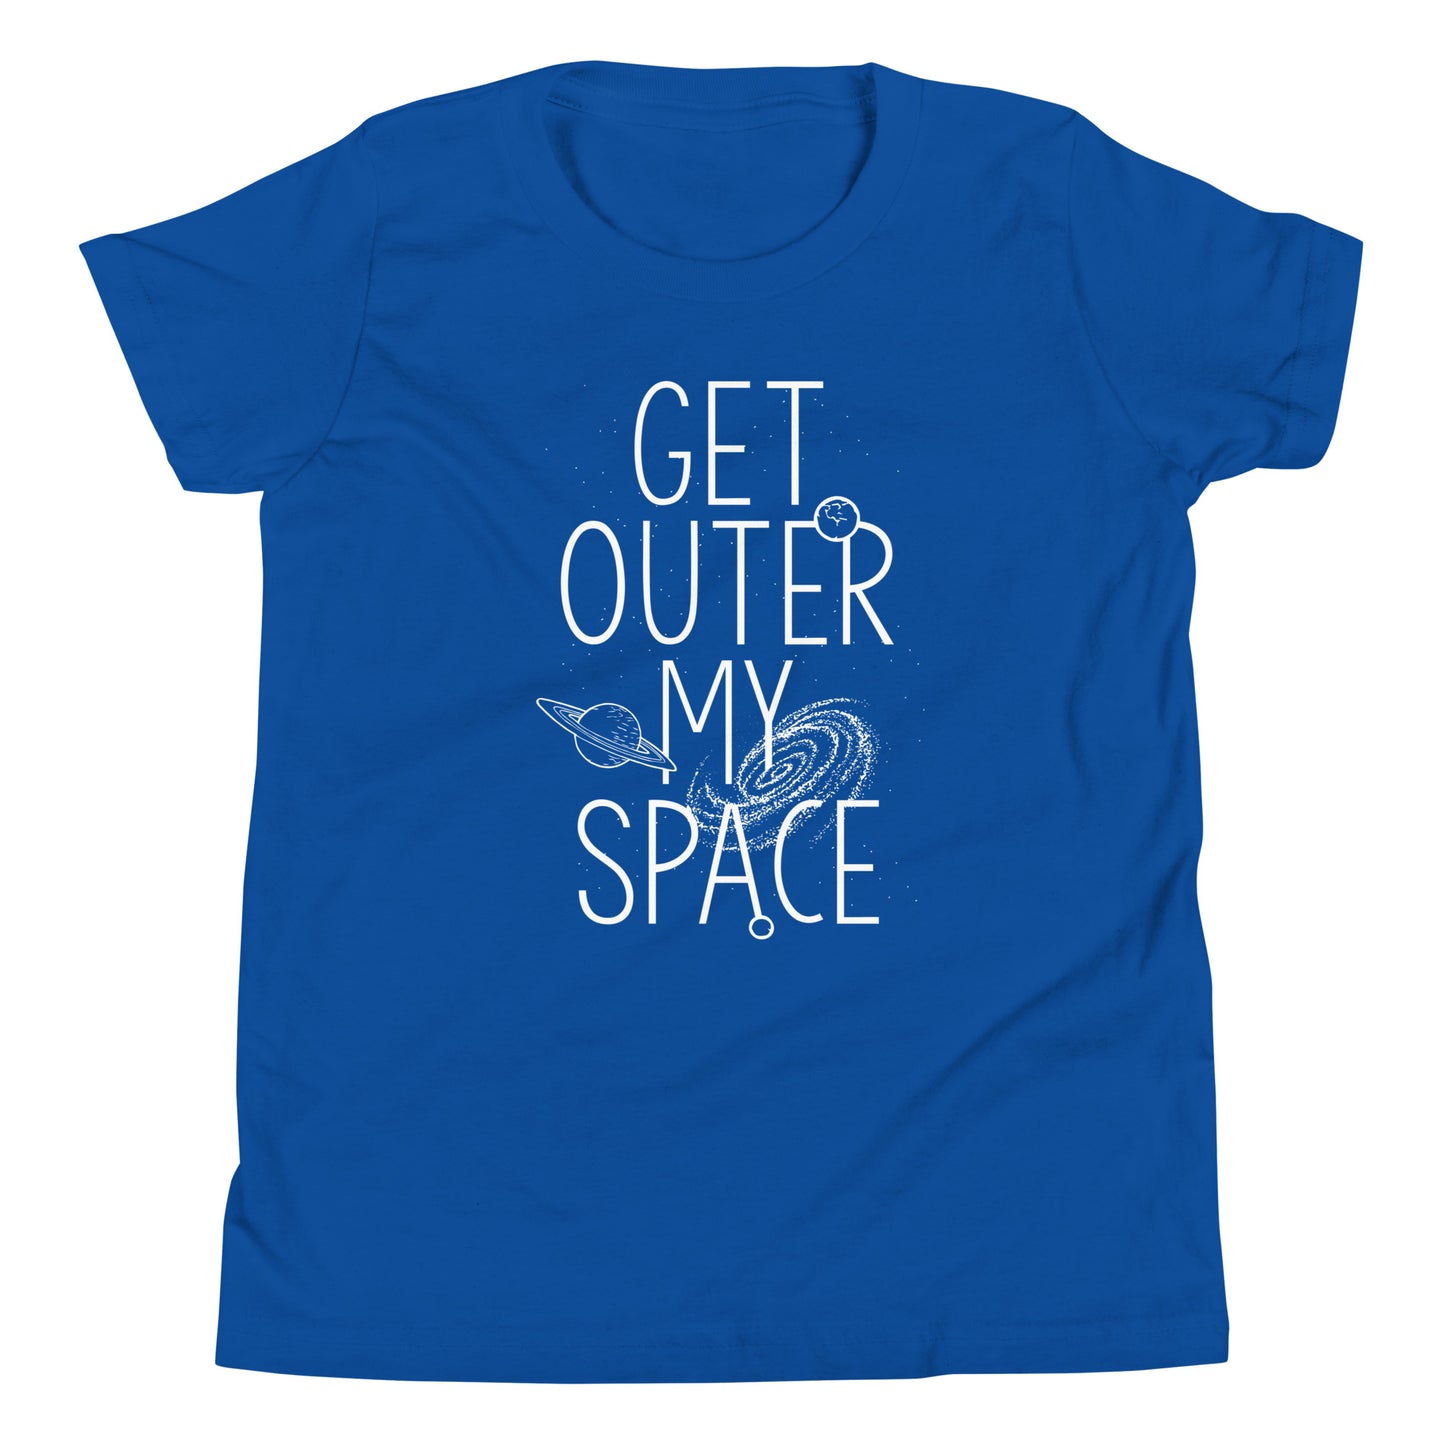 Get Outer My Space Kid's Youth Tee